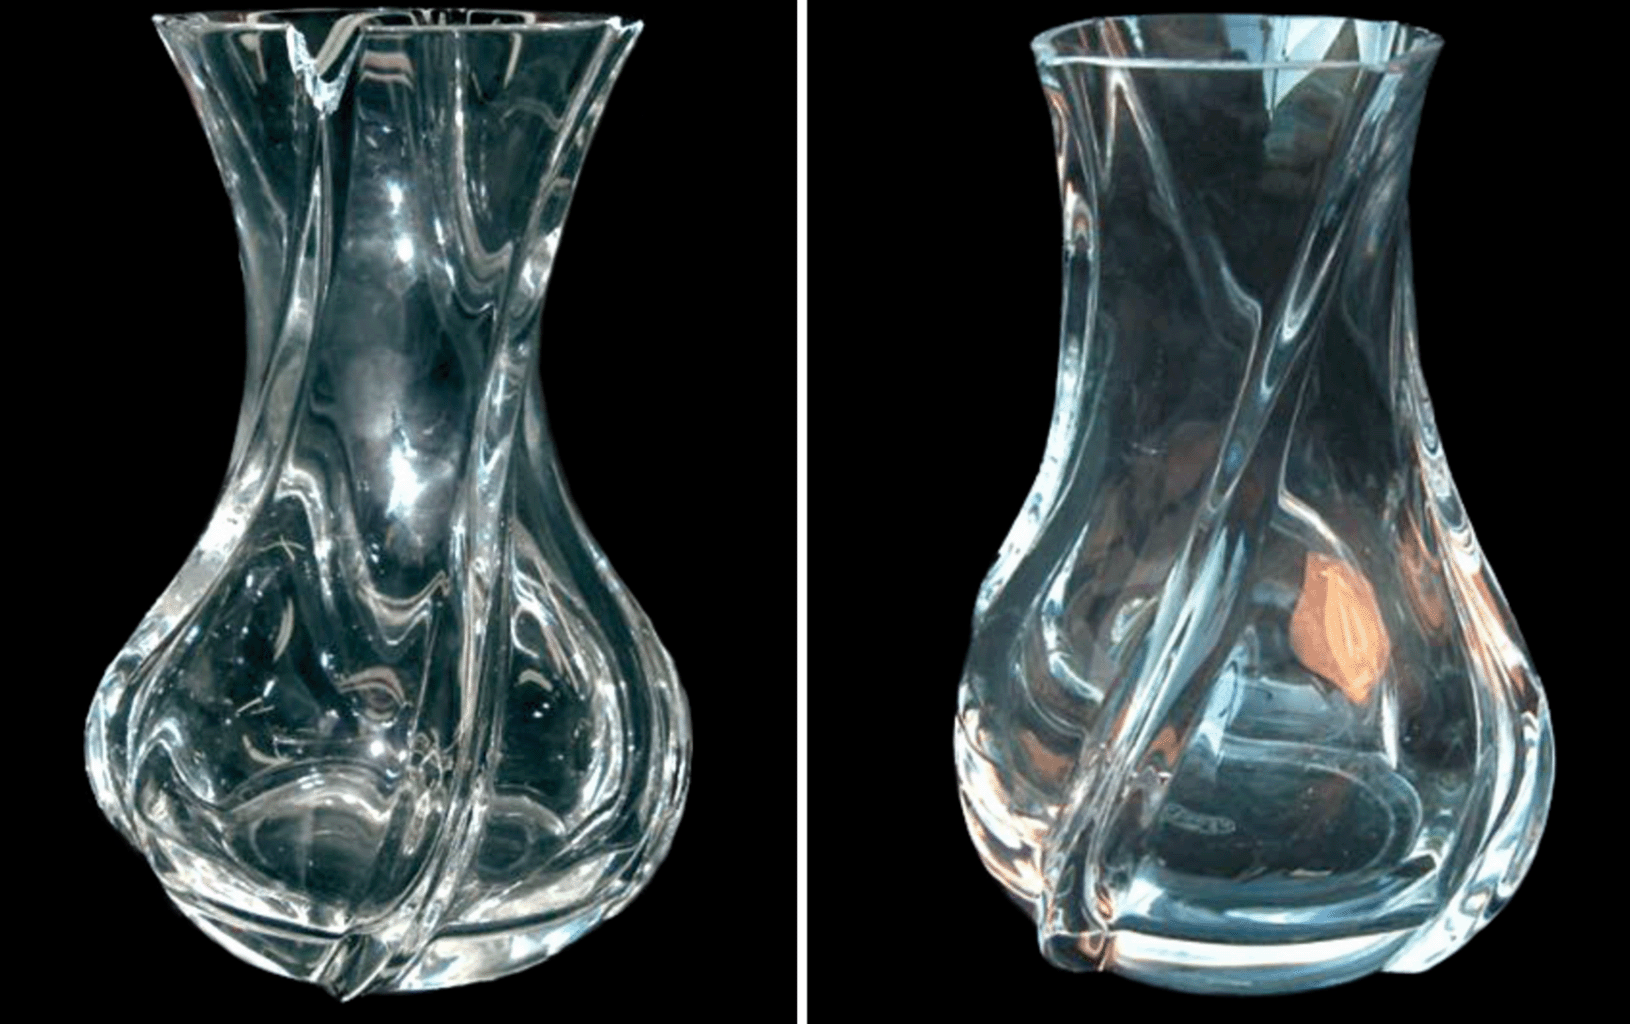 Baccarat Crystal Vase before and after